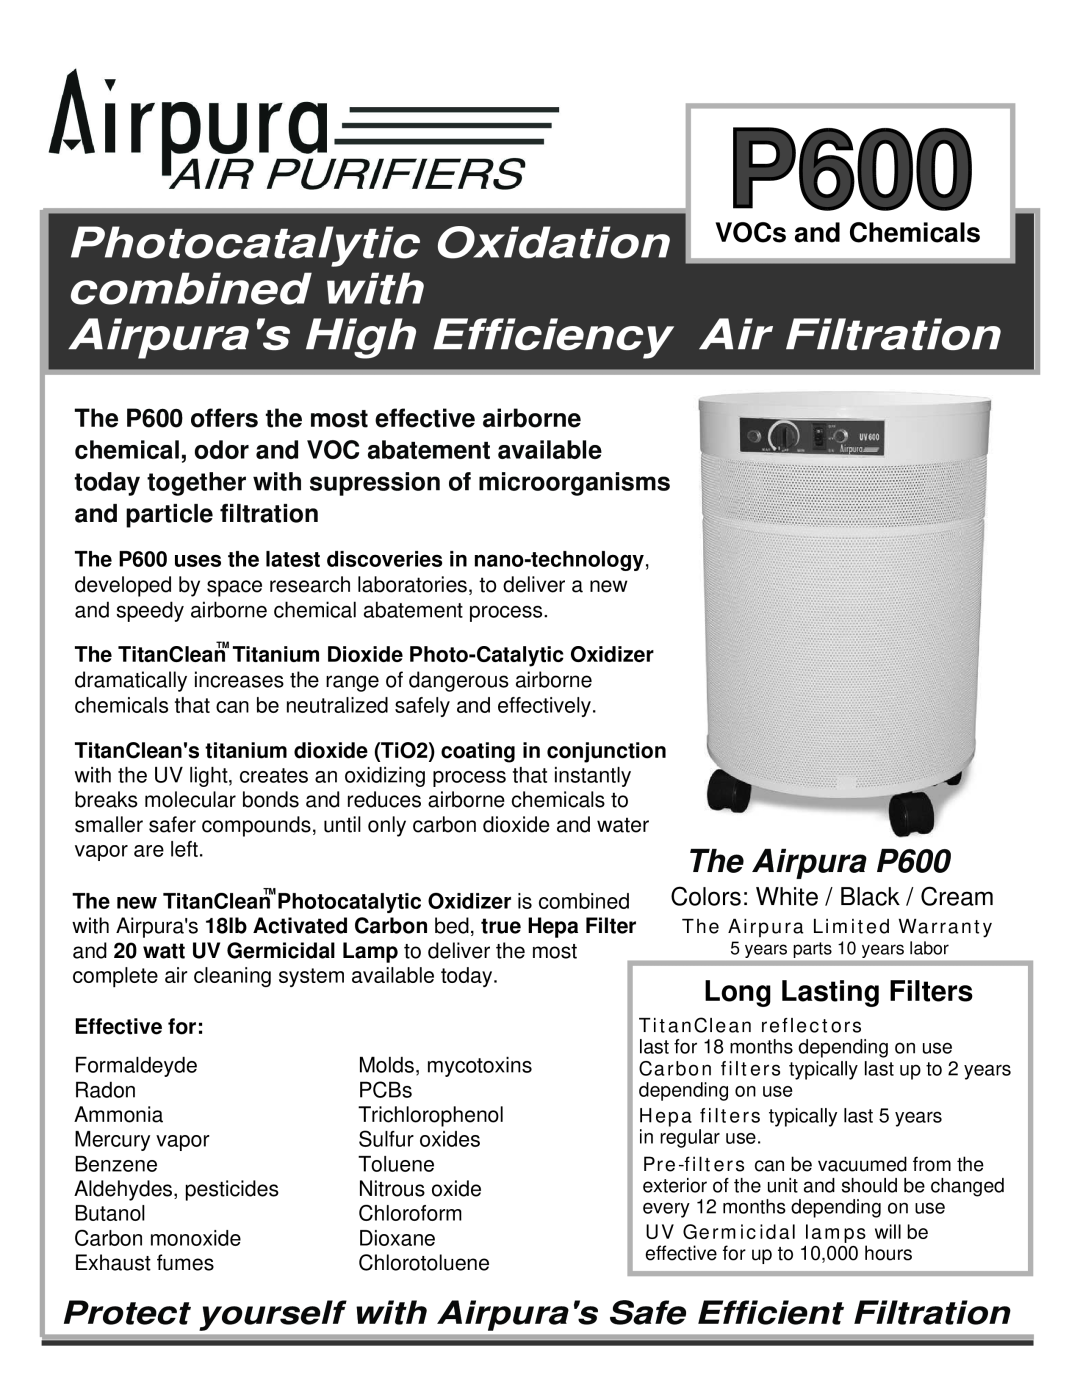 Airpura Industries warranty The Airpura P600, Photocatalytic Oxidation, combined with, Air Filtration, Effective for 